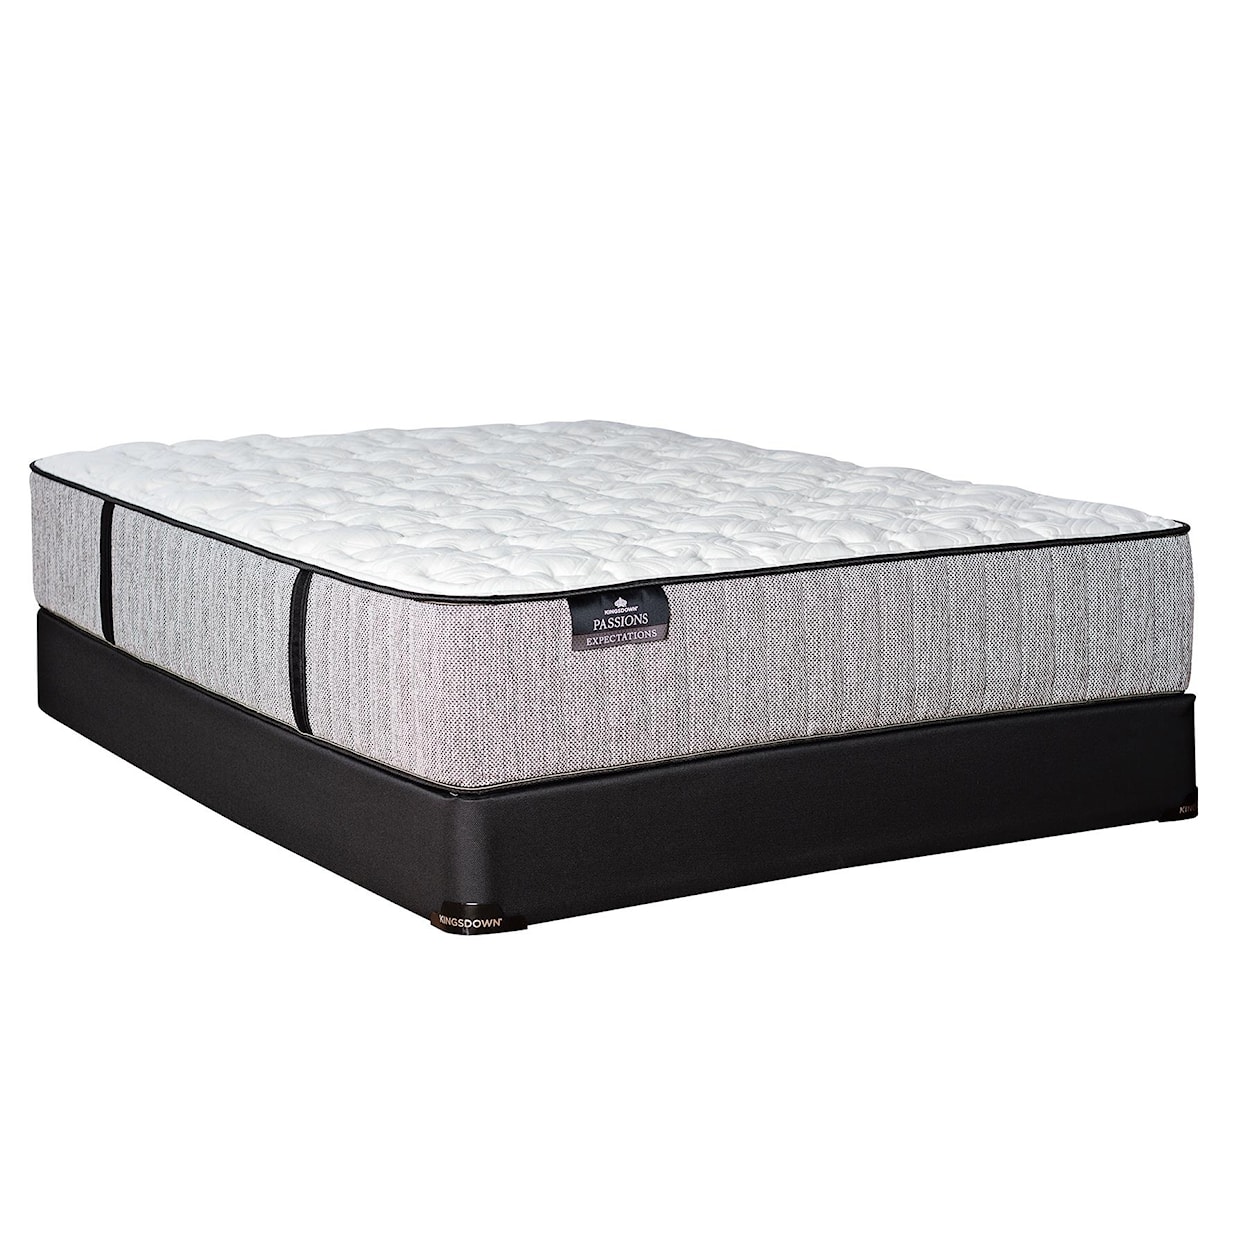 Kingsdown Passions Expectations Twin 13 1/4" Firm Mattress